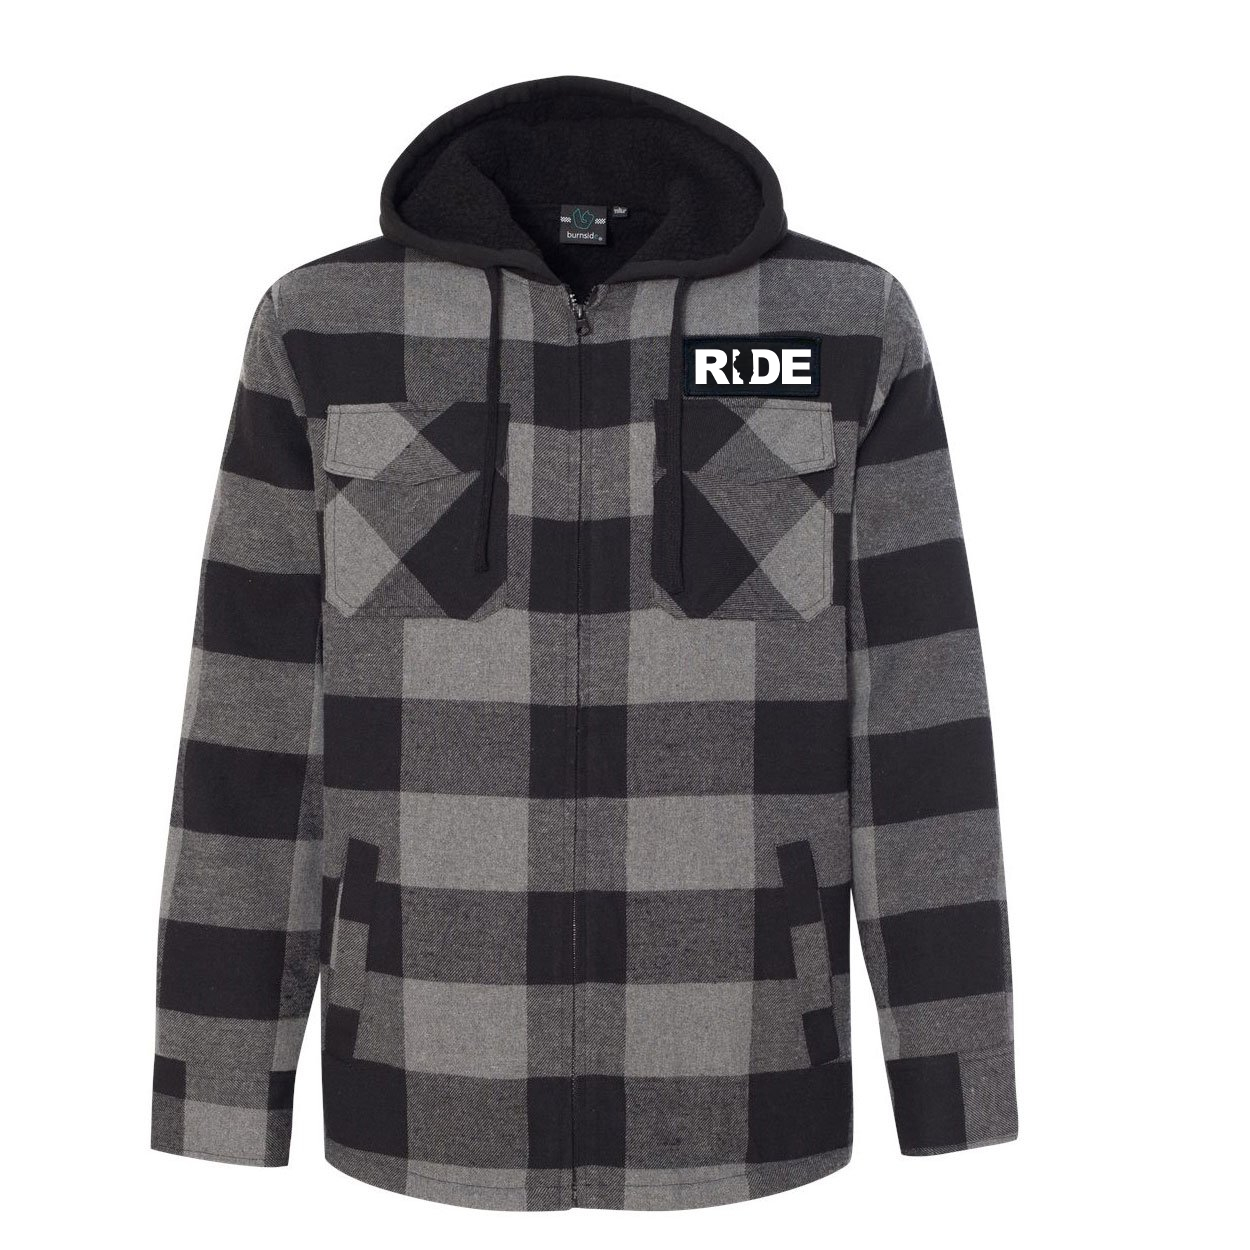 Ride Illinois Classic Unisex Full Zip Woven Patch Hooded Flannel Jacket Black/Gray (White Logo)